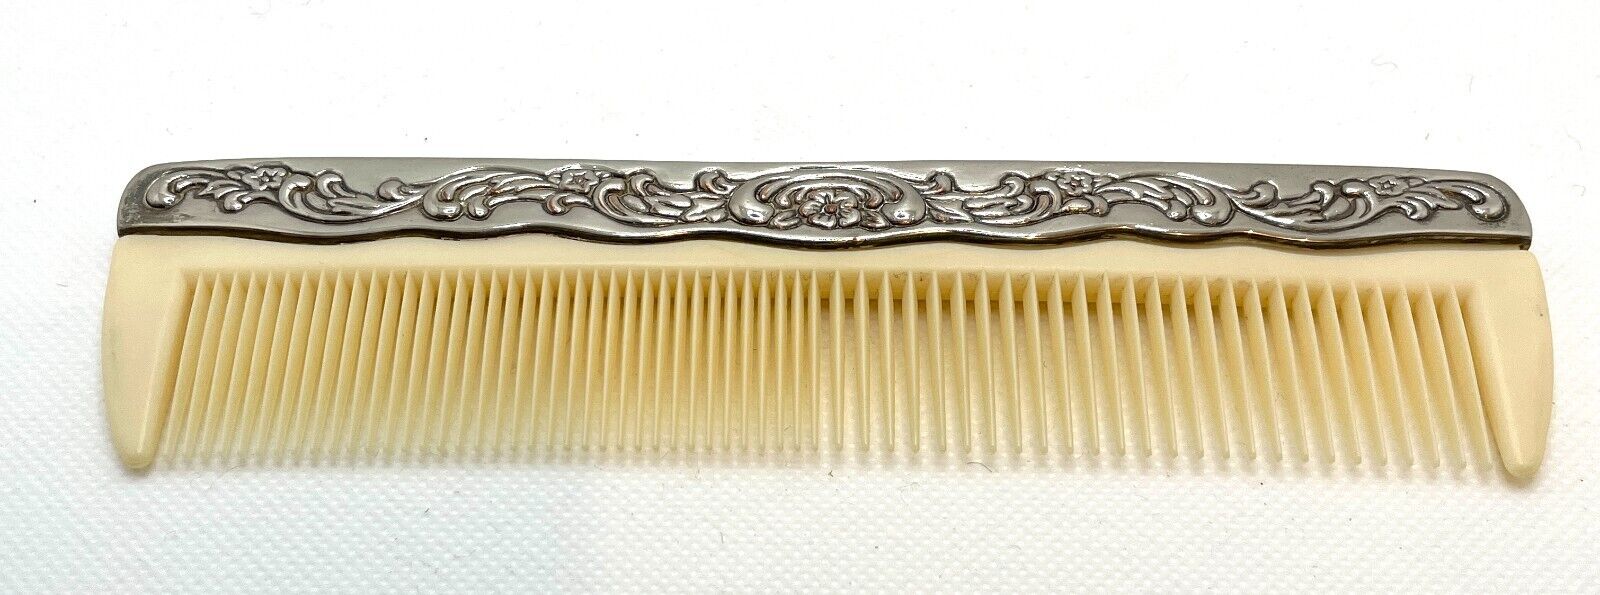 Antique Vintage Silver Plated Comb 